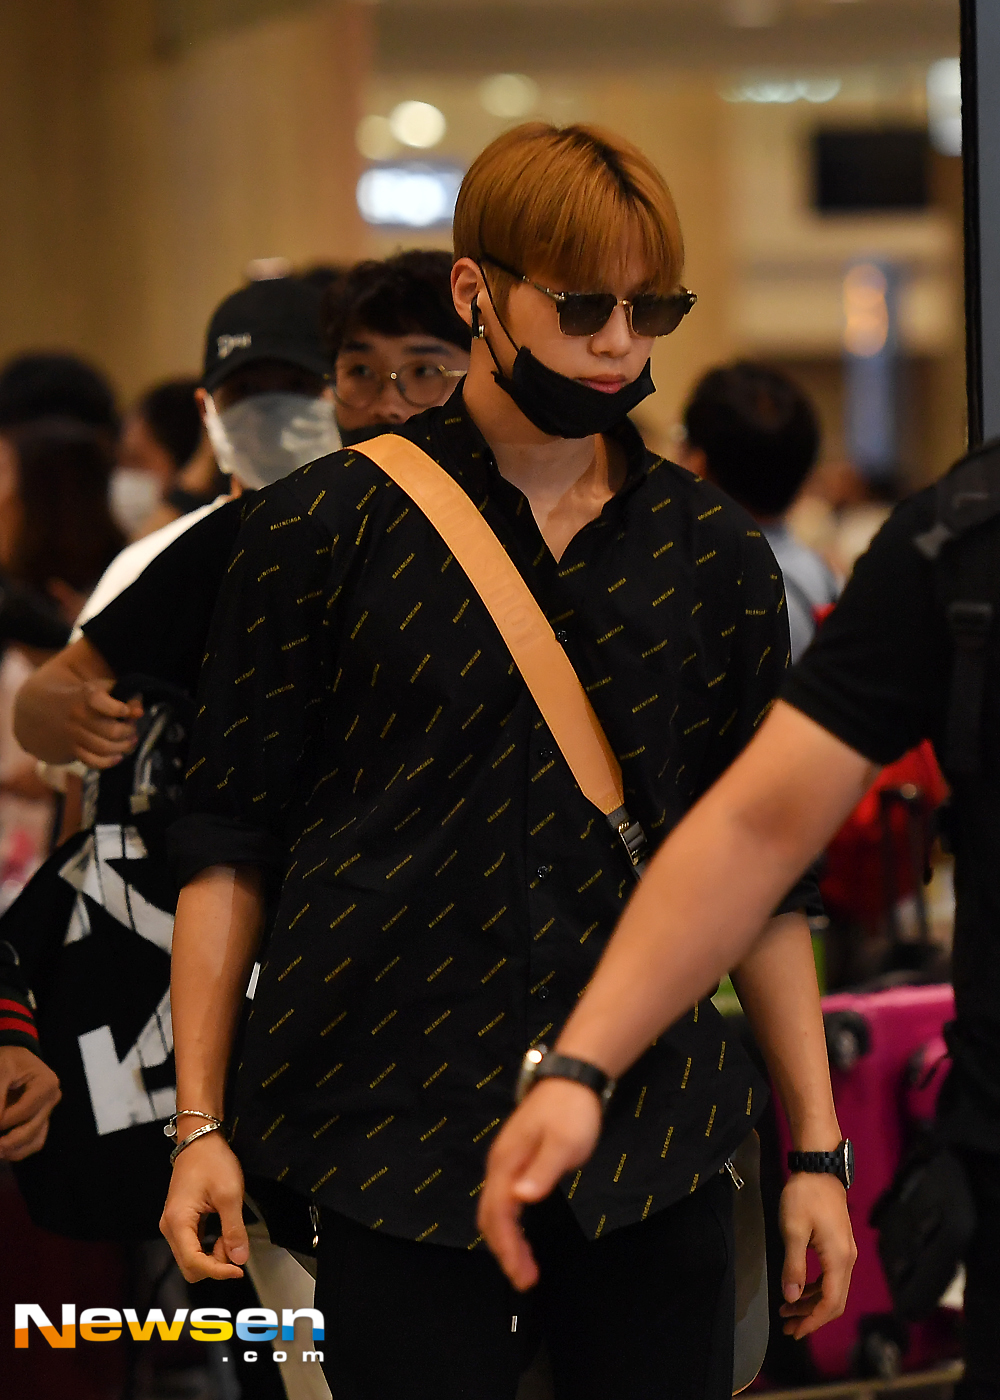 Group Wanna One returned home through Incheon International Airports Terminal 1 on the afternoon of August 13 after KCON LA performanceWanna One (Kang Daniel, Park Ji-hoon, Lee Dae-hui, Kim Jae-hwan, Ong Sung-woo, Park Woo-jin, Ry Kwan-rin, Yoon Ji-sung, Hwang Min-hyun, Bae Jin-young and Ha Sung-woon) are coming out of the arrival hall on the day.expressiveness